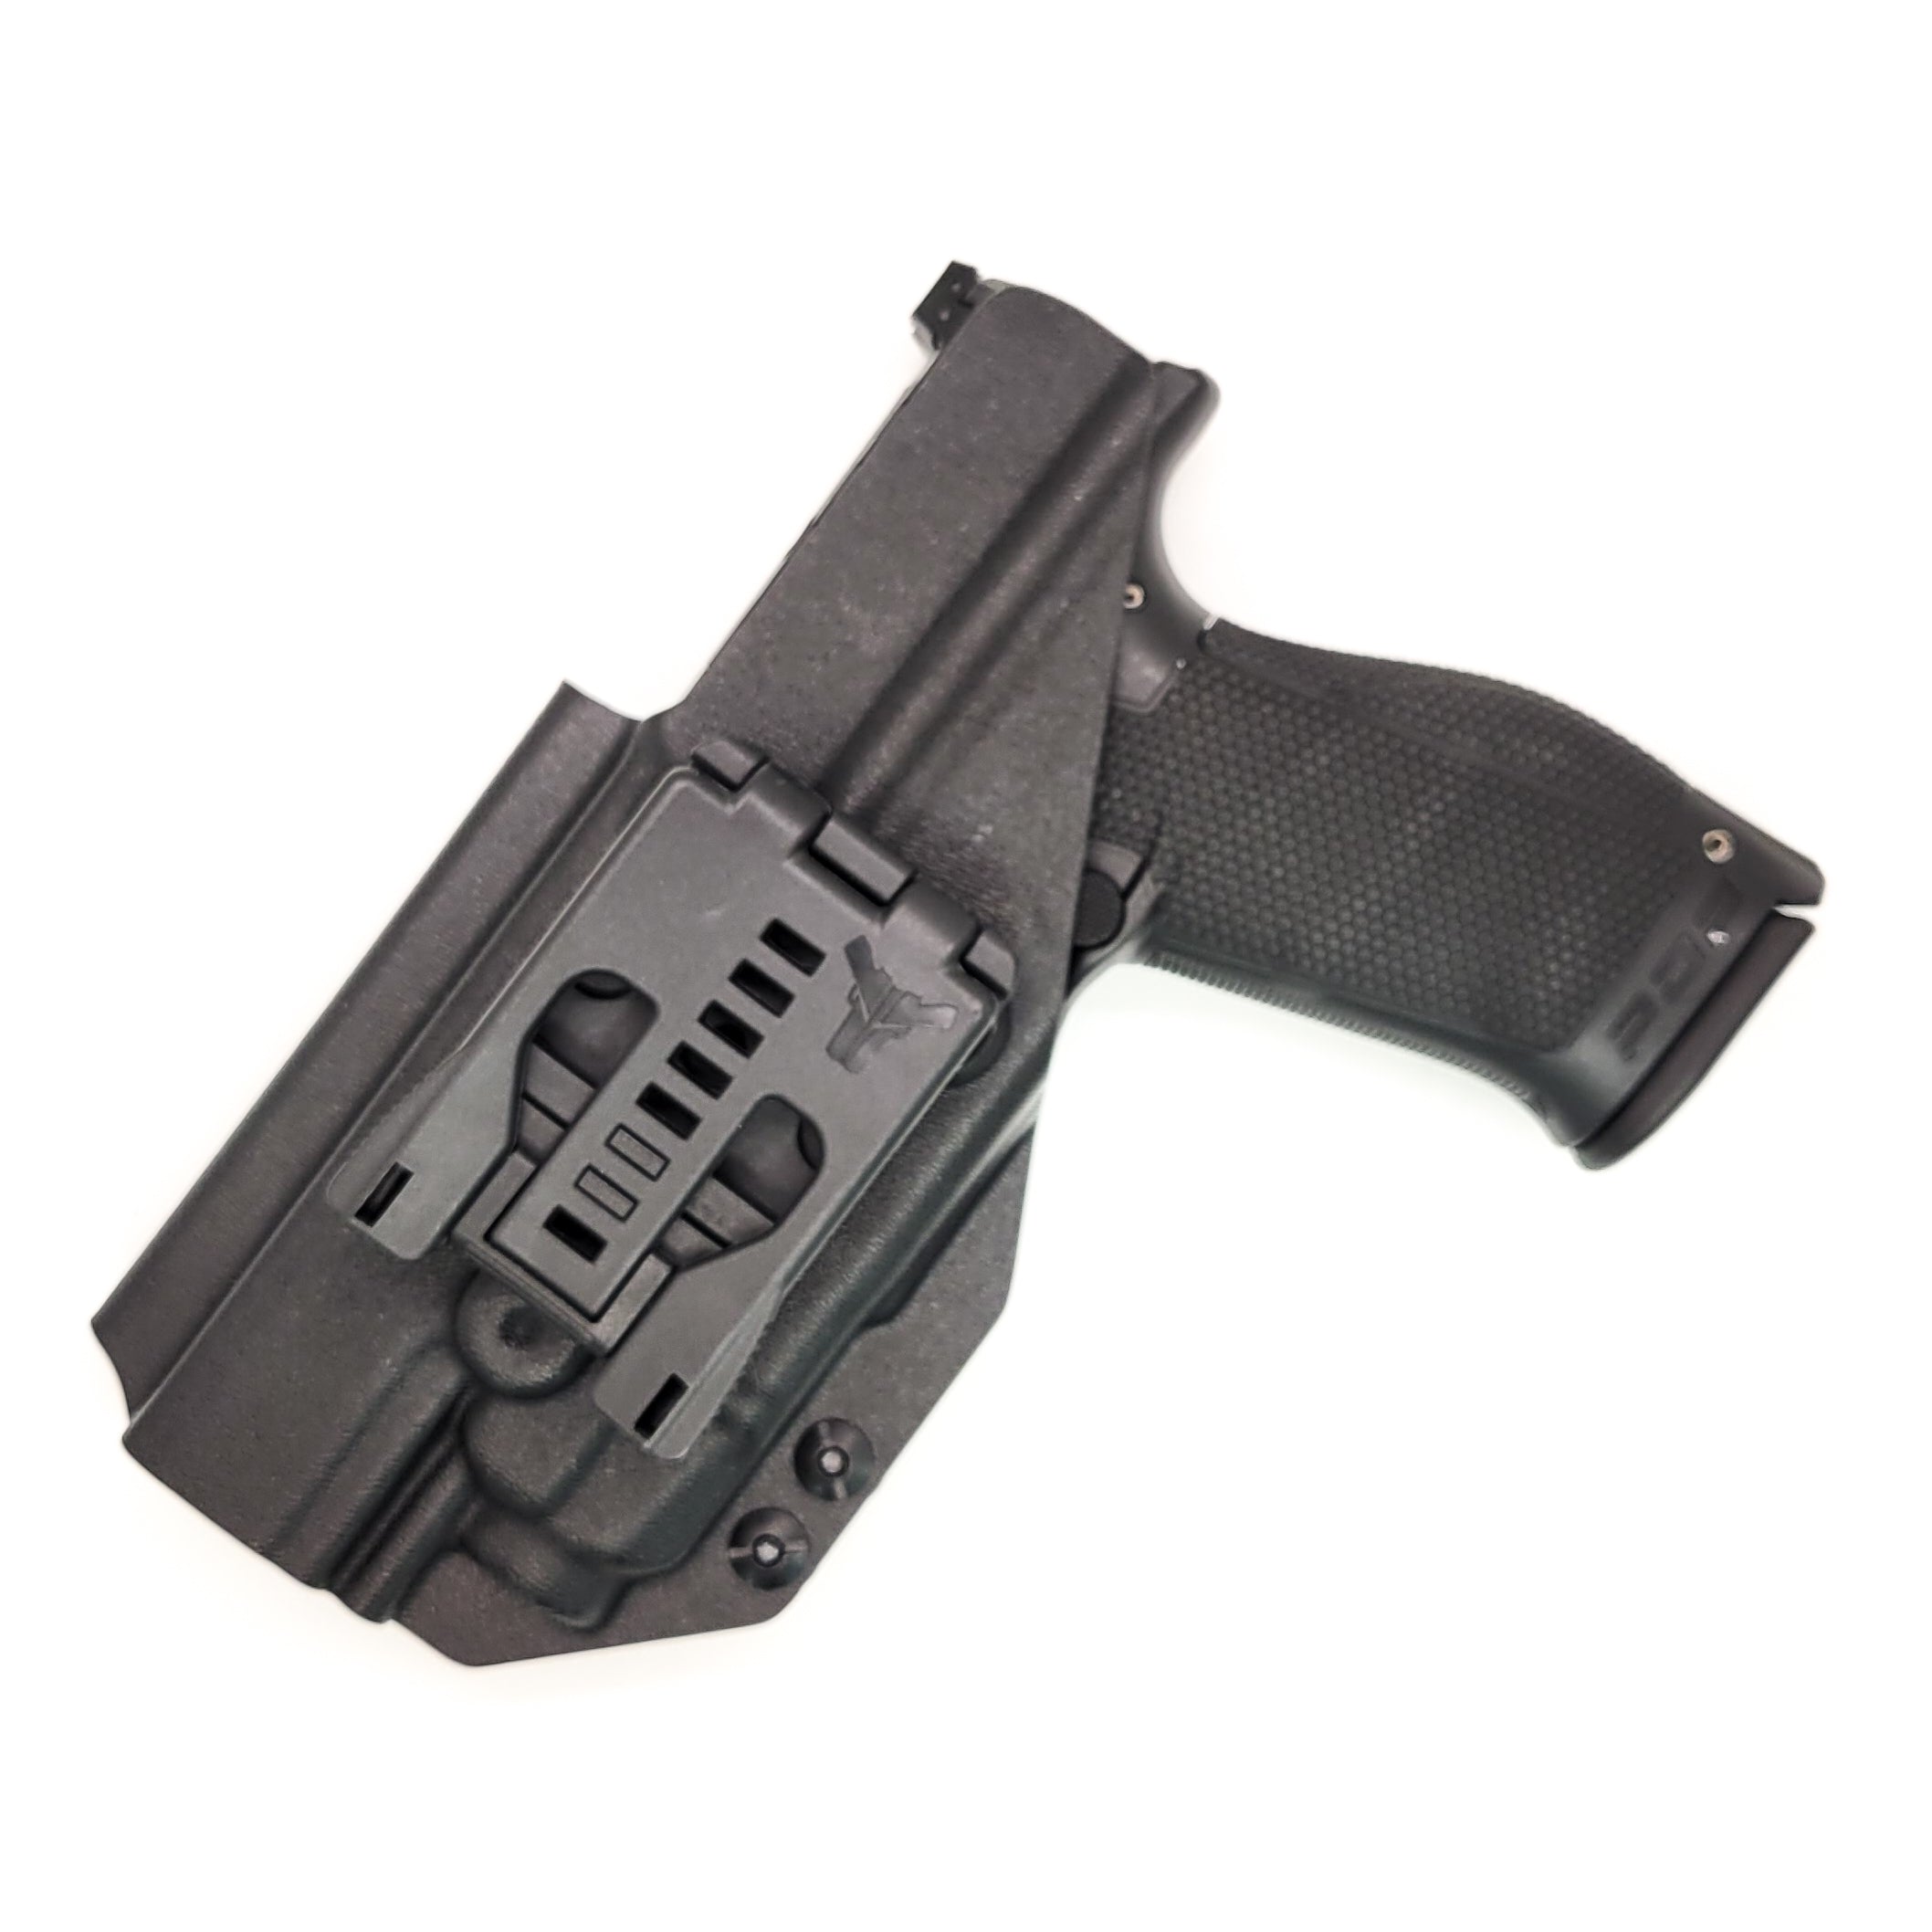 For the best Outside Waistband Taco Style Holster designed to fit the Walther PDP 4.5" Full-Size pistol with the Streamlight TLR-7A or TLR-7 mounted on the firearm, shop Four Brothers Holsters. Cut for red dot sight, full sweat guard, adjustable retention & open muzzle for threaded barrels & compensators.